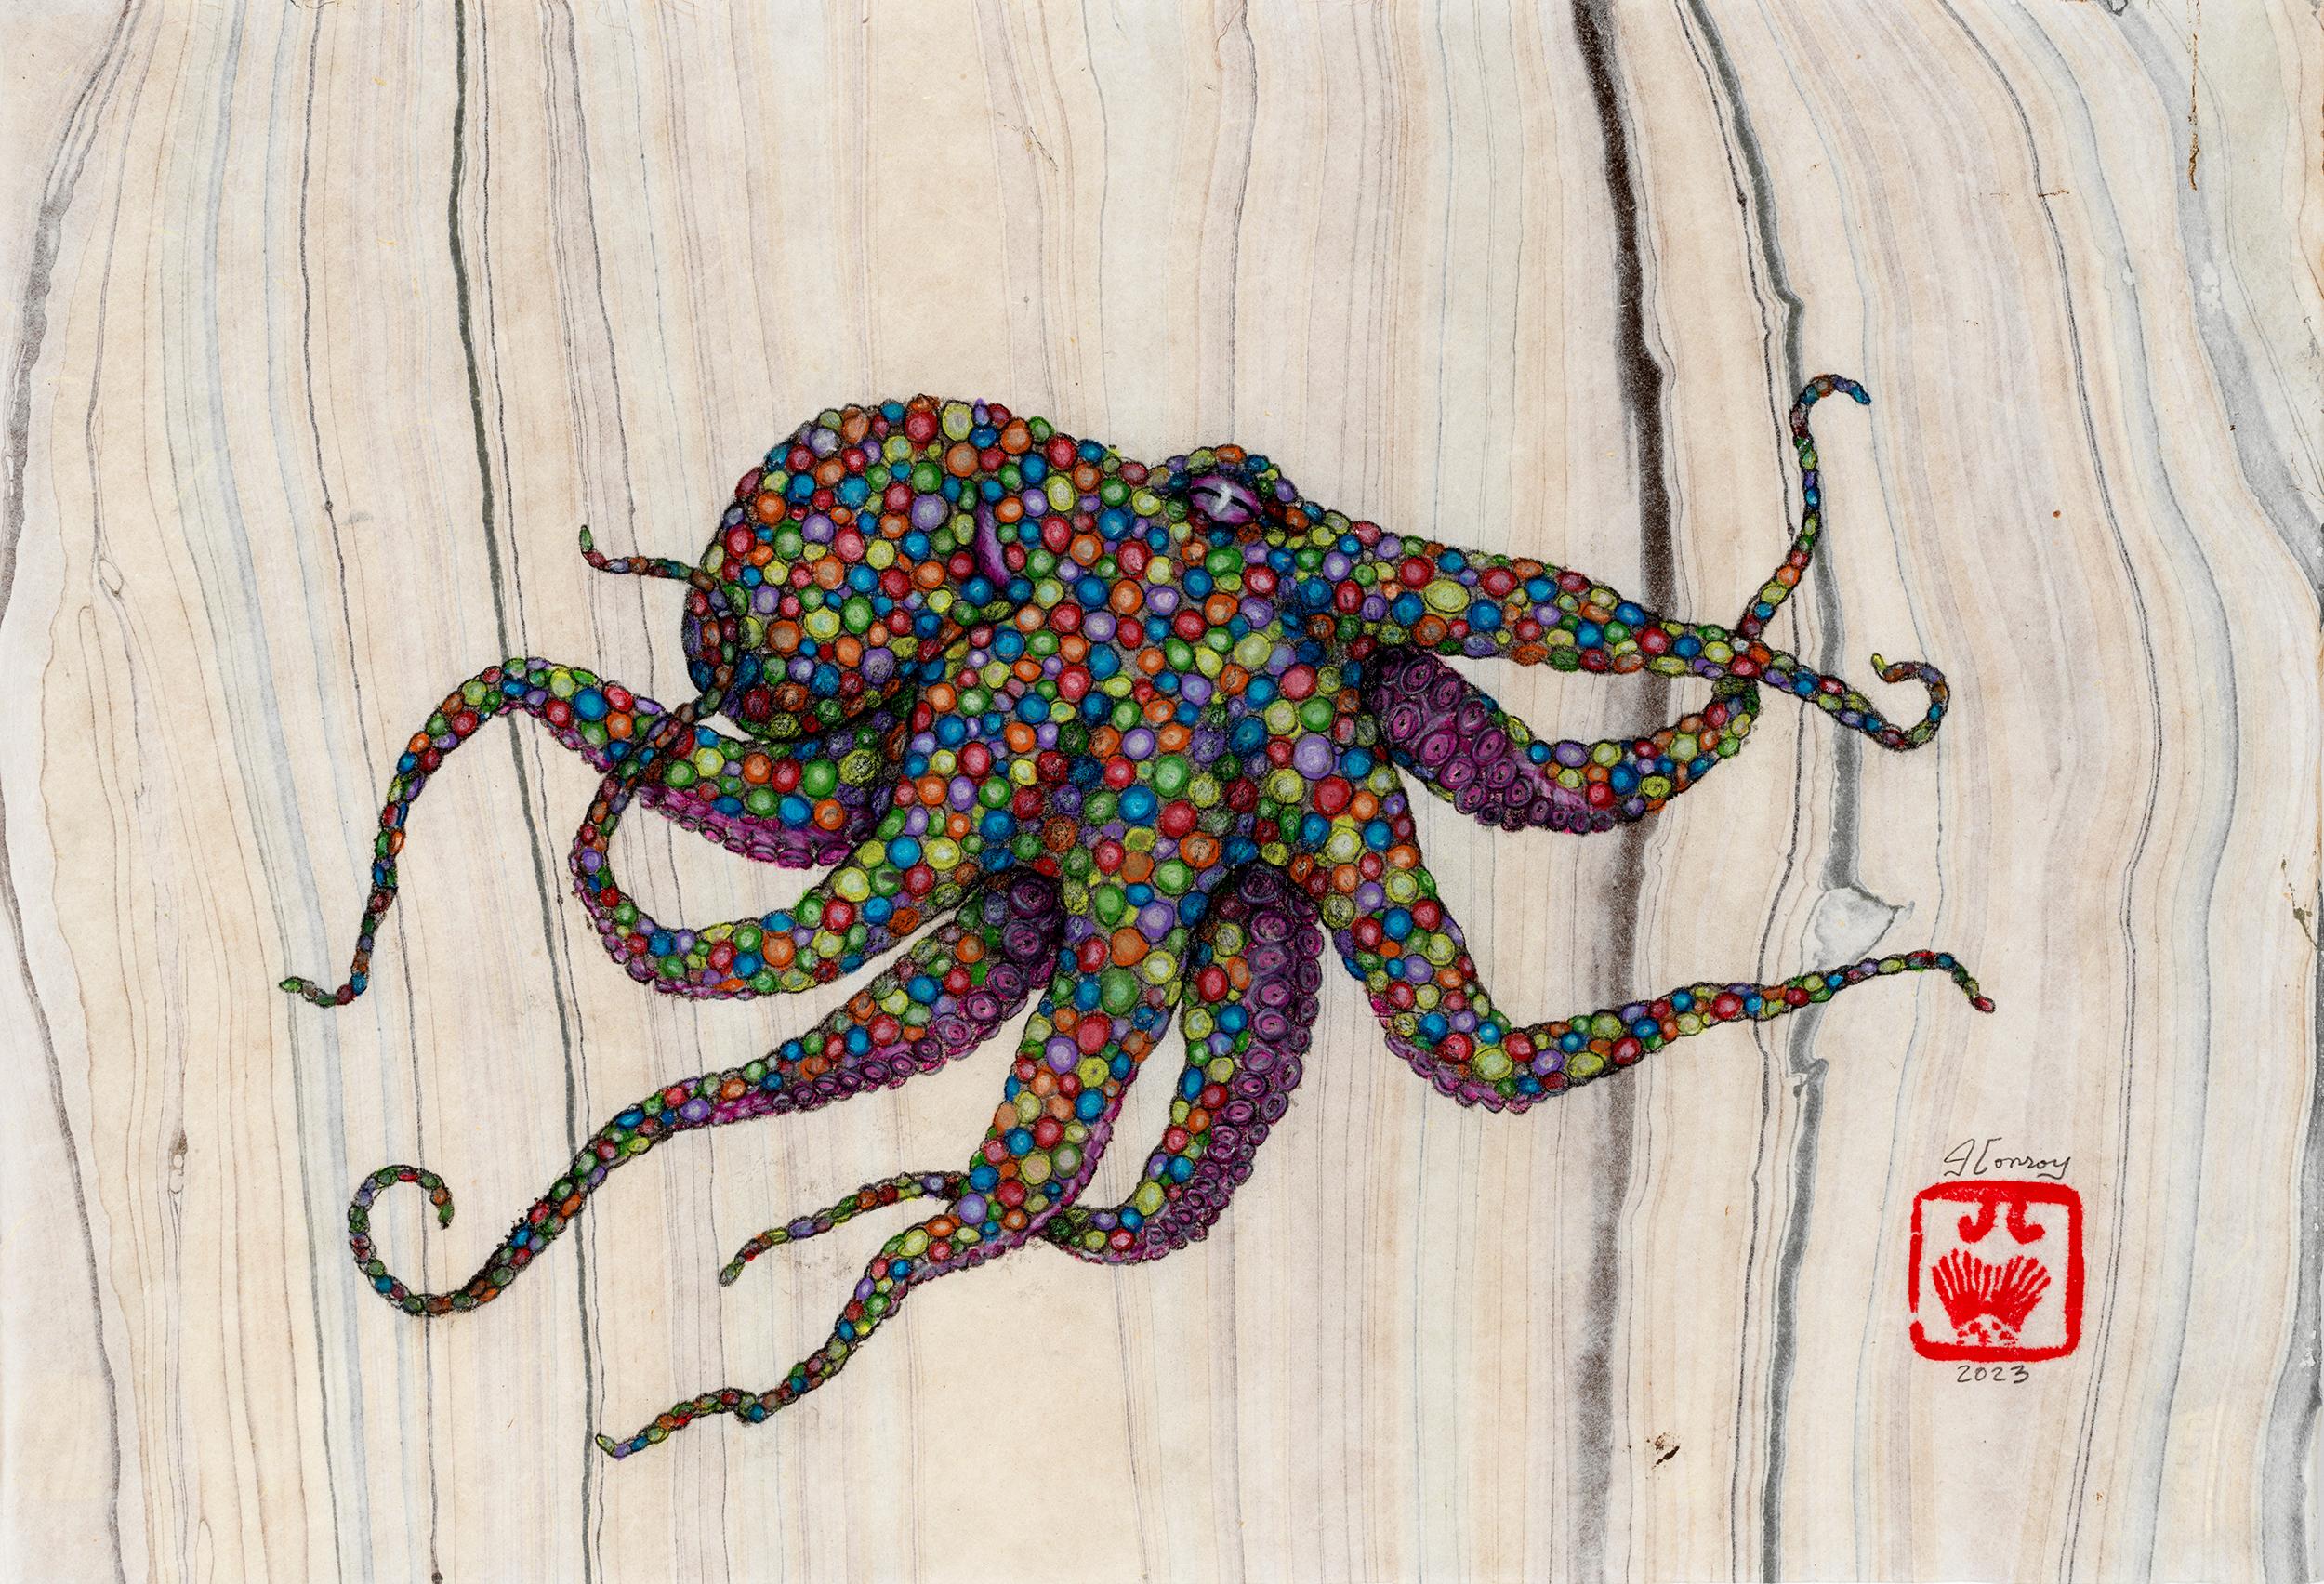 Silly Rabbit, Trix are for Kids - Gyotaku Style Sumi Ink Painting of an Octopus 